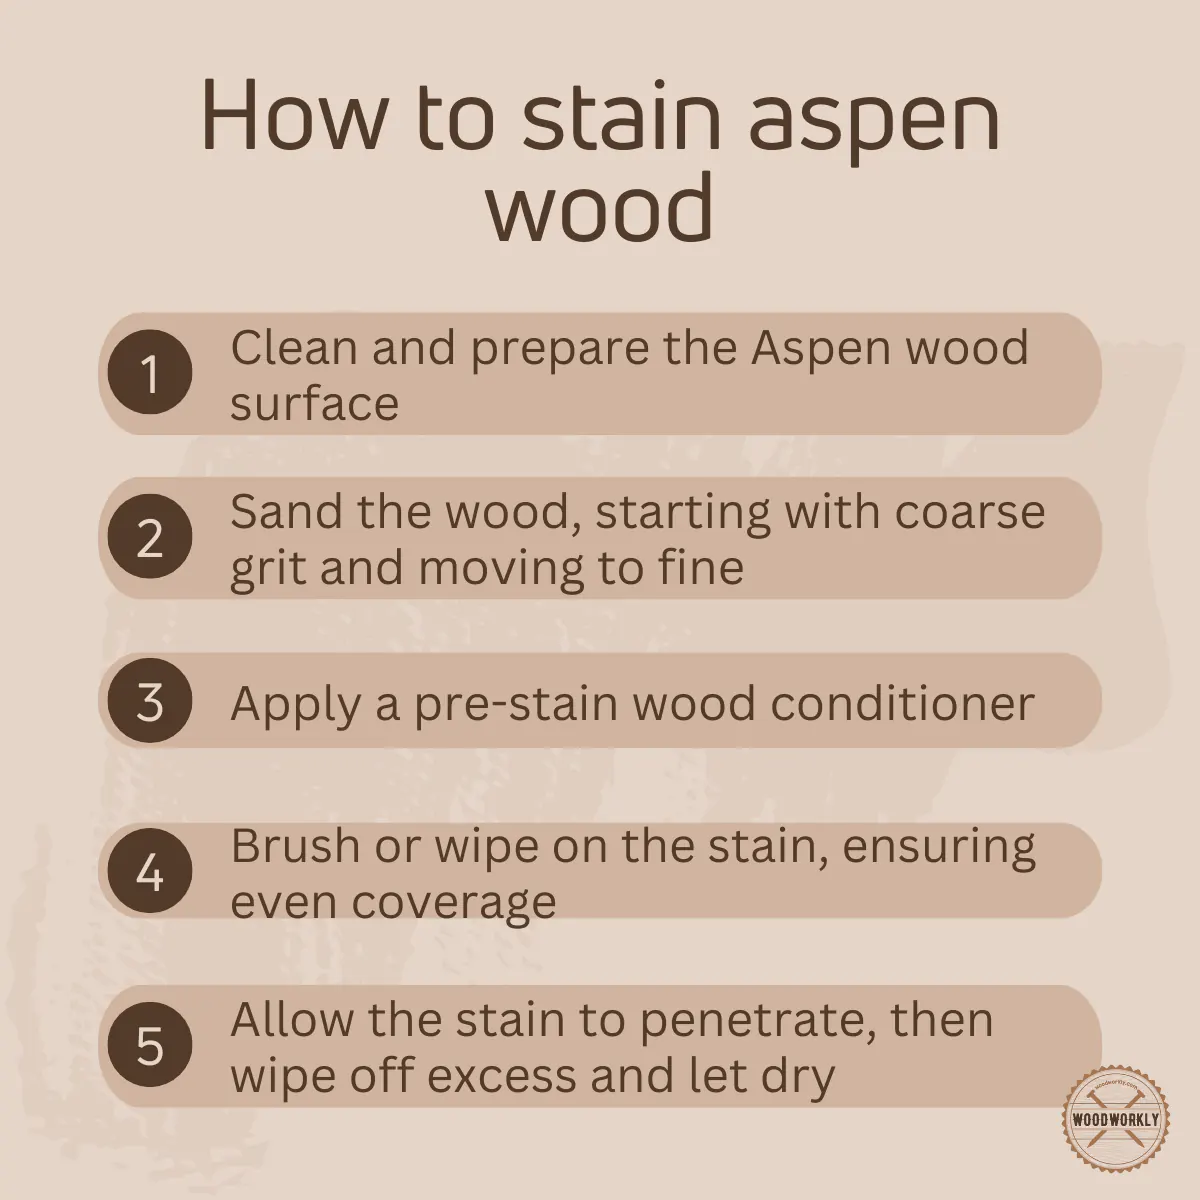 How to stain aspen wood